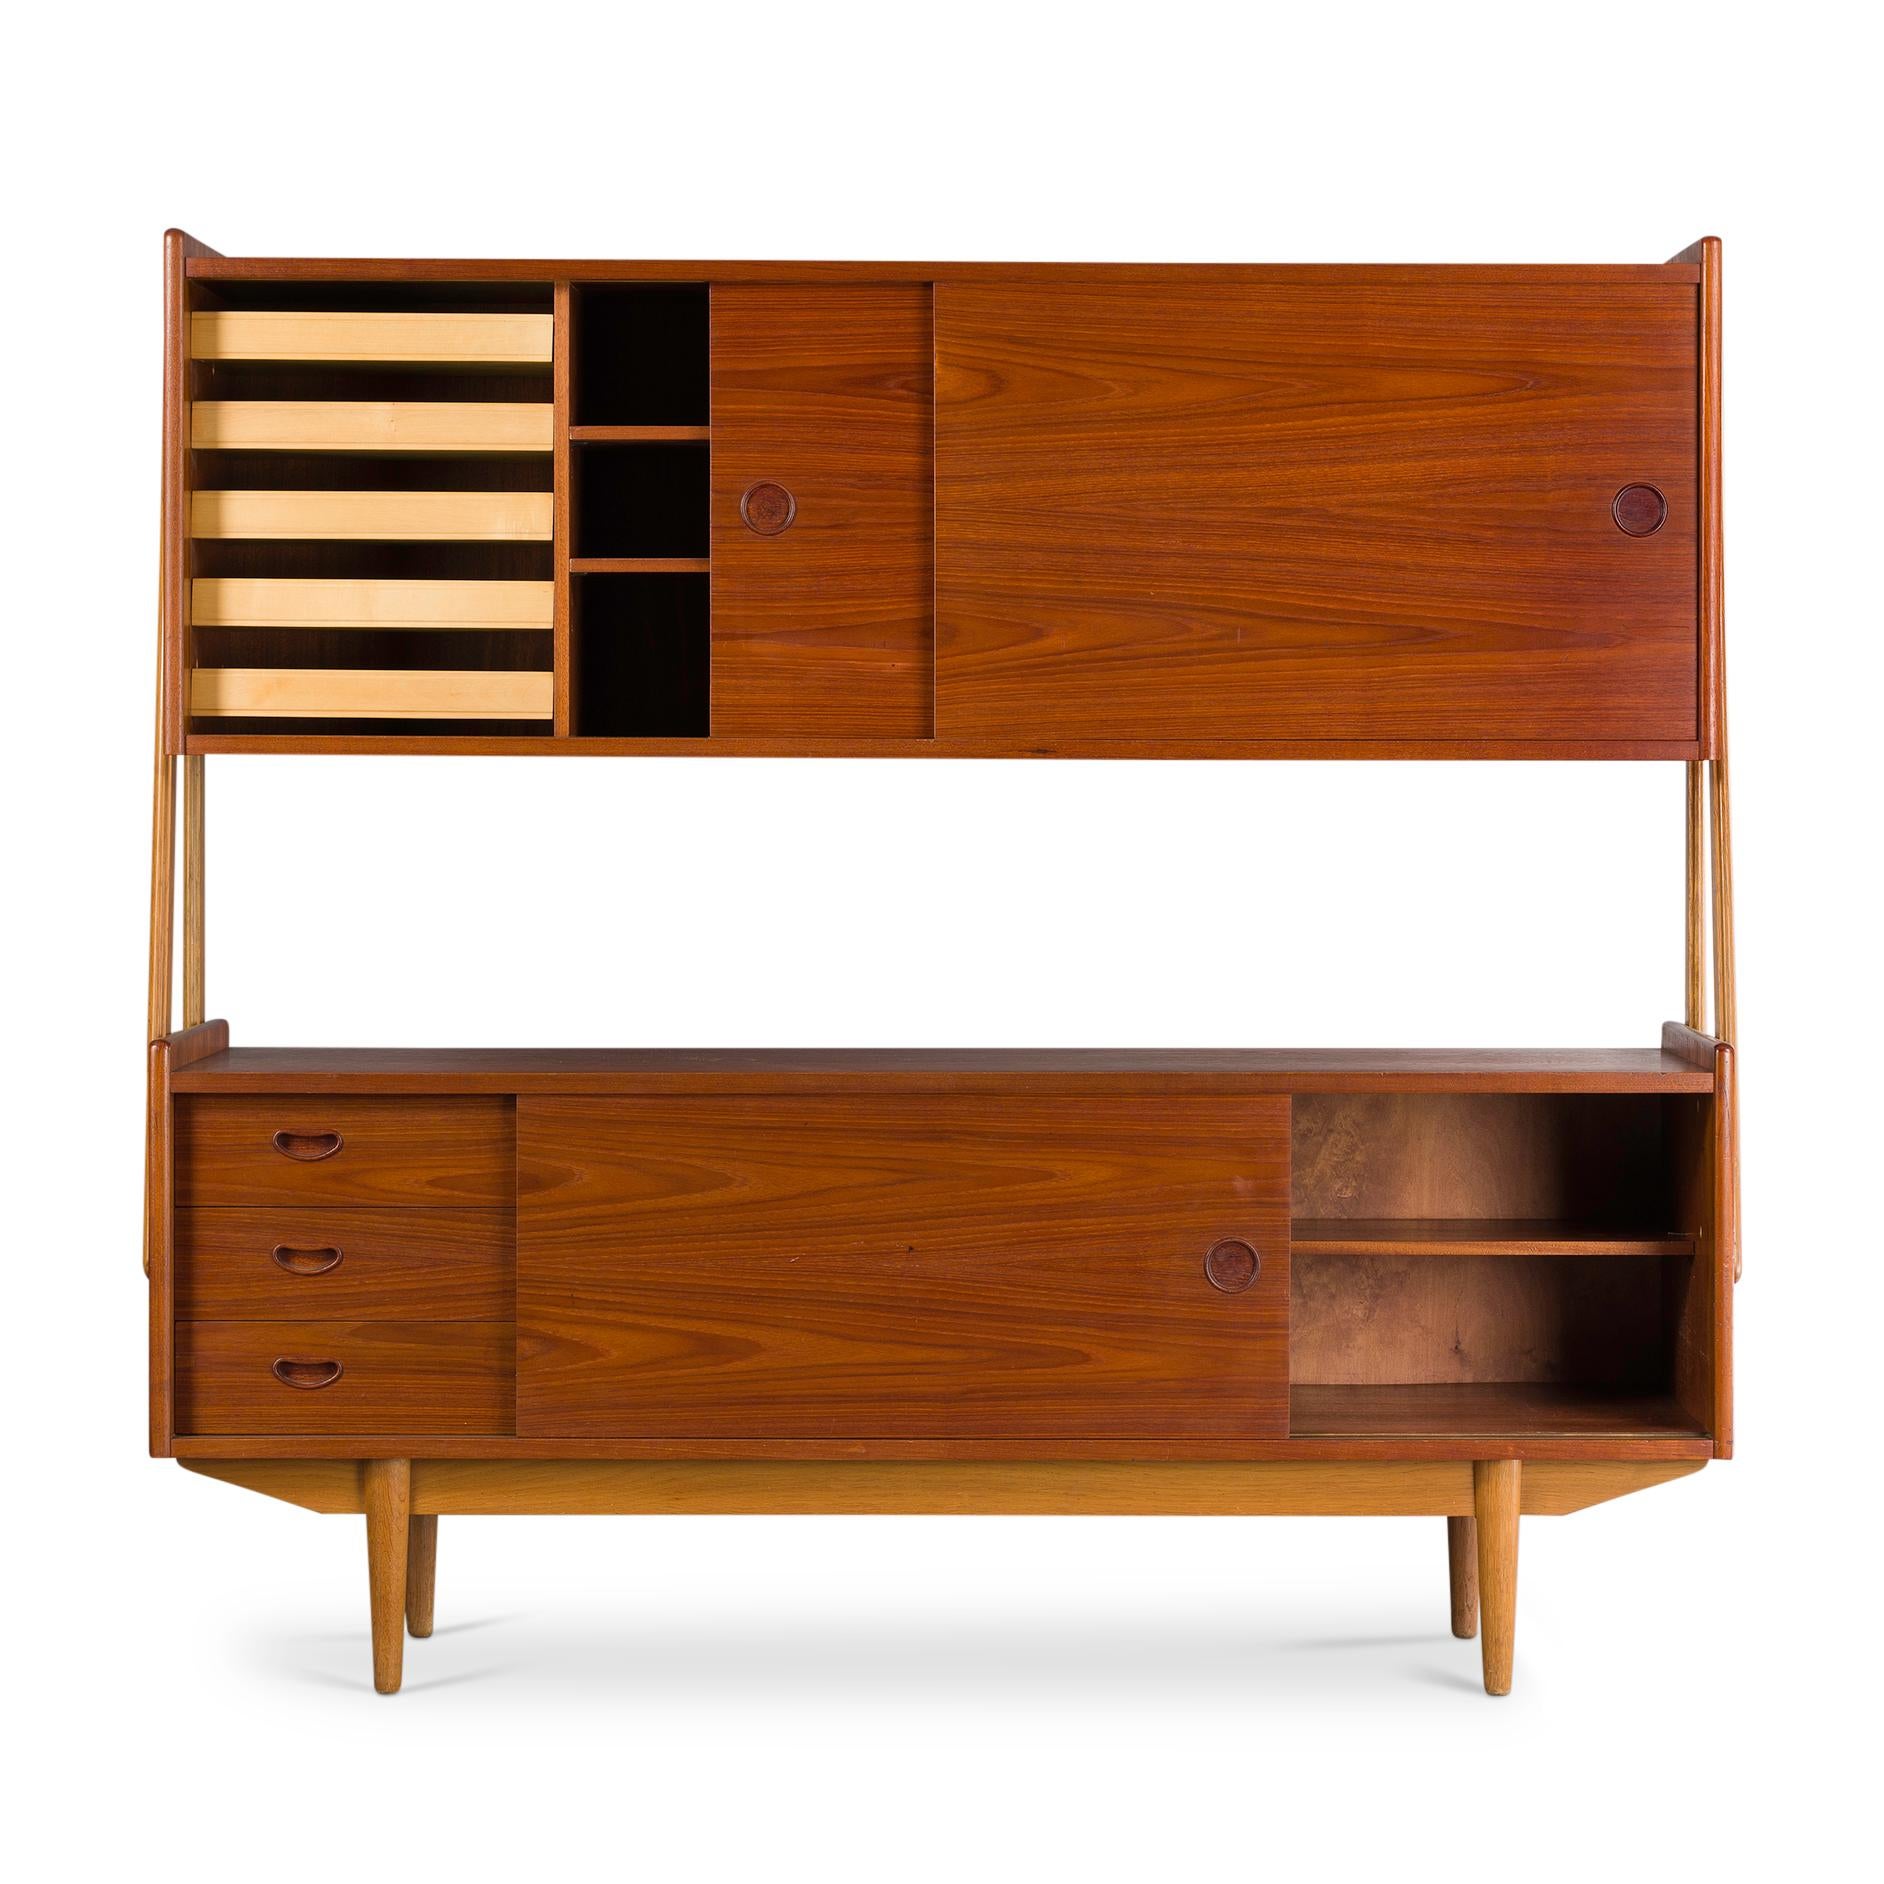 This Danish beauty is constructed out of solid oak and teak veneer. The hutch or upper segment of this two-tier chest or credenza is held up by two pairs of organically shaped solid oak legs. The teak veneer is placed on top of solid beach wood.